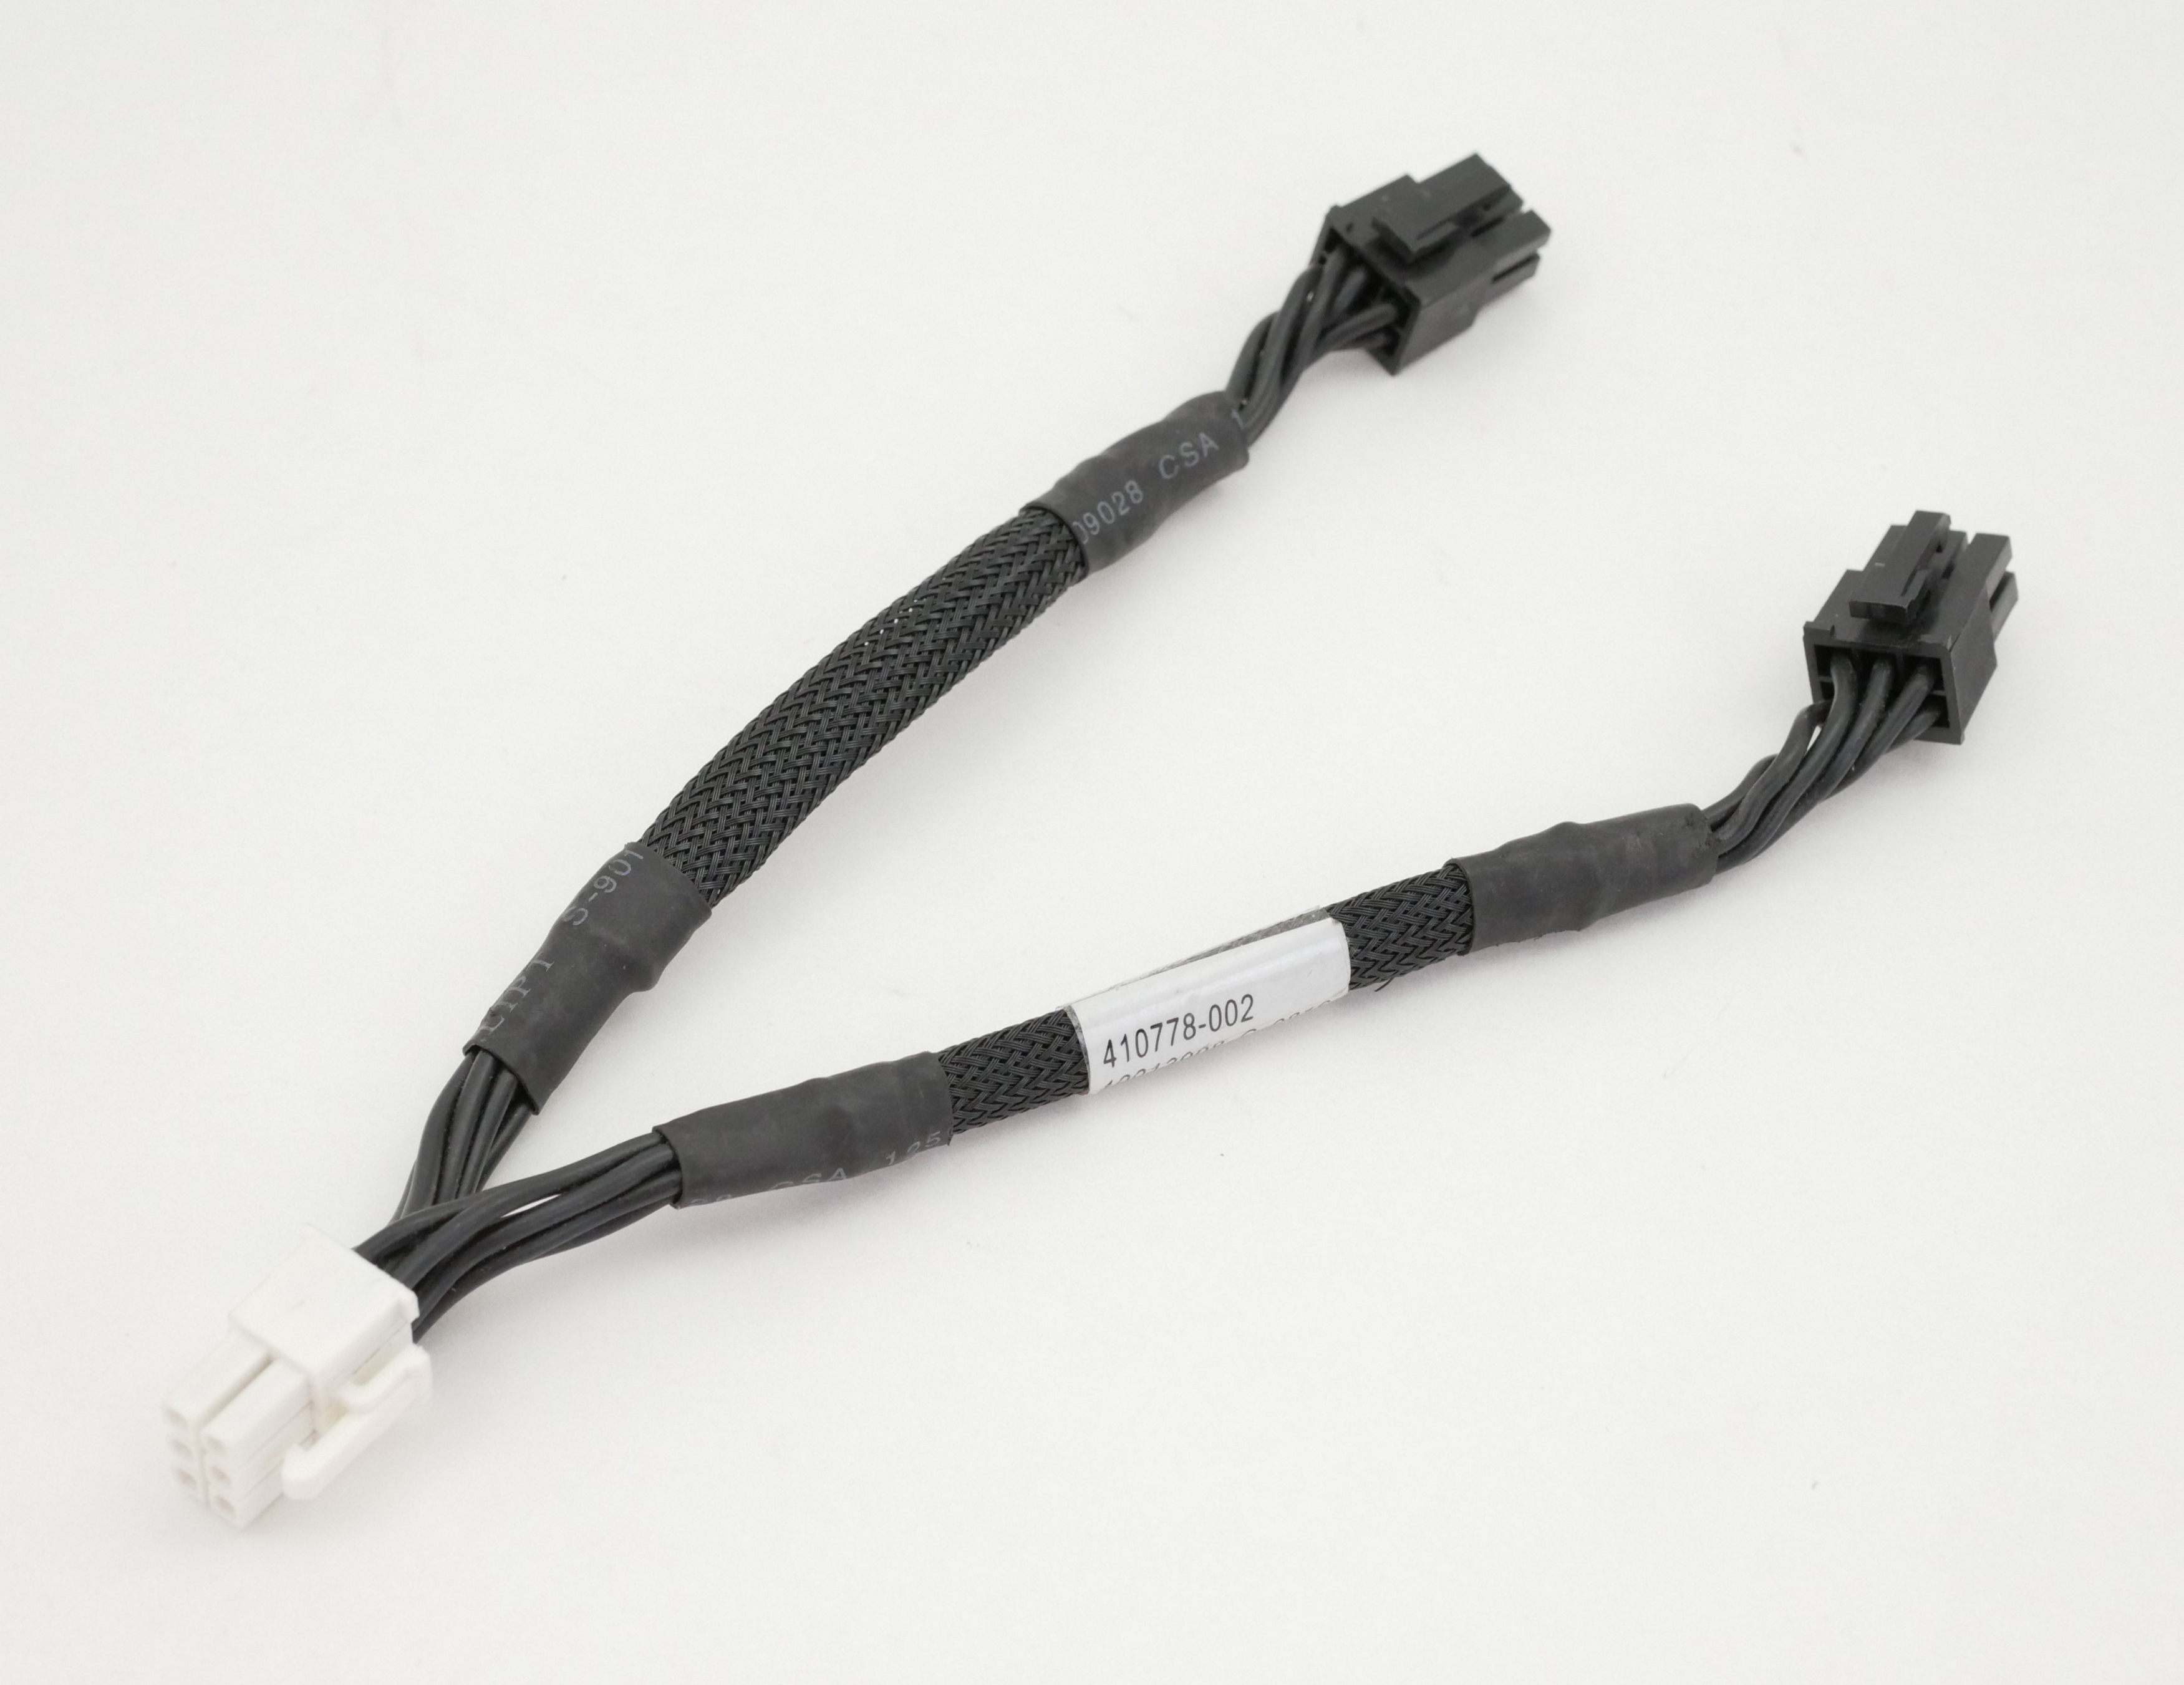 HP PCI Power Cable Y 6" 6pin to dual 6pin 410778-002 - Click Image to Close